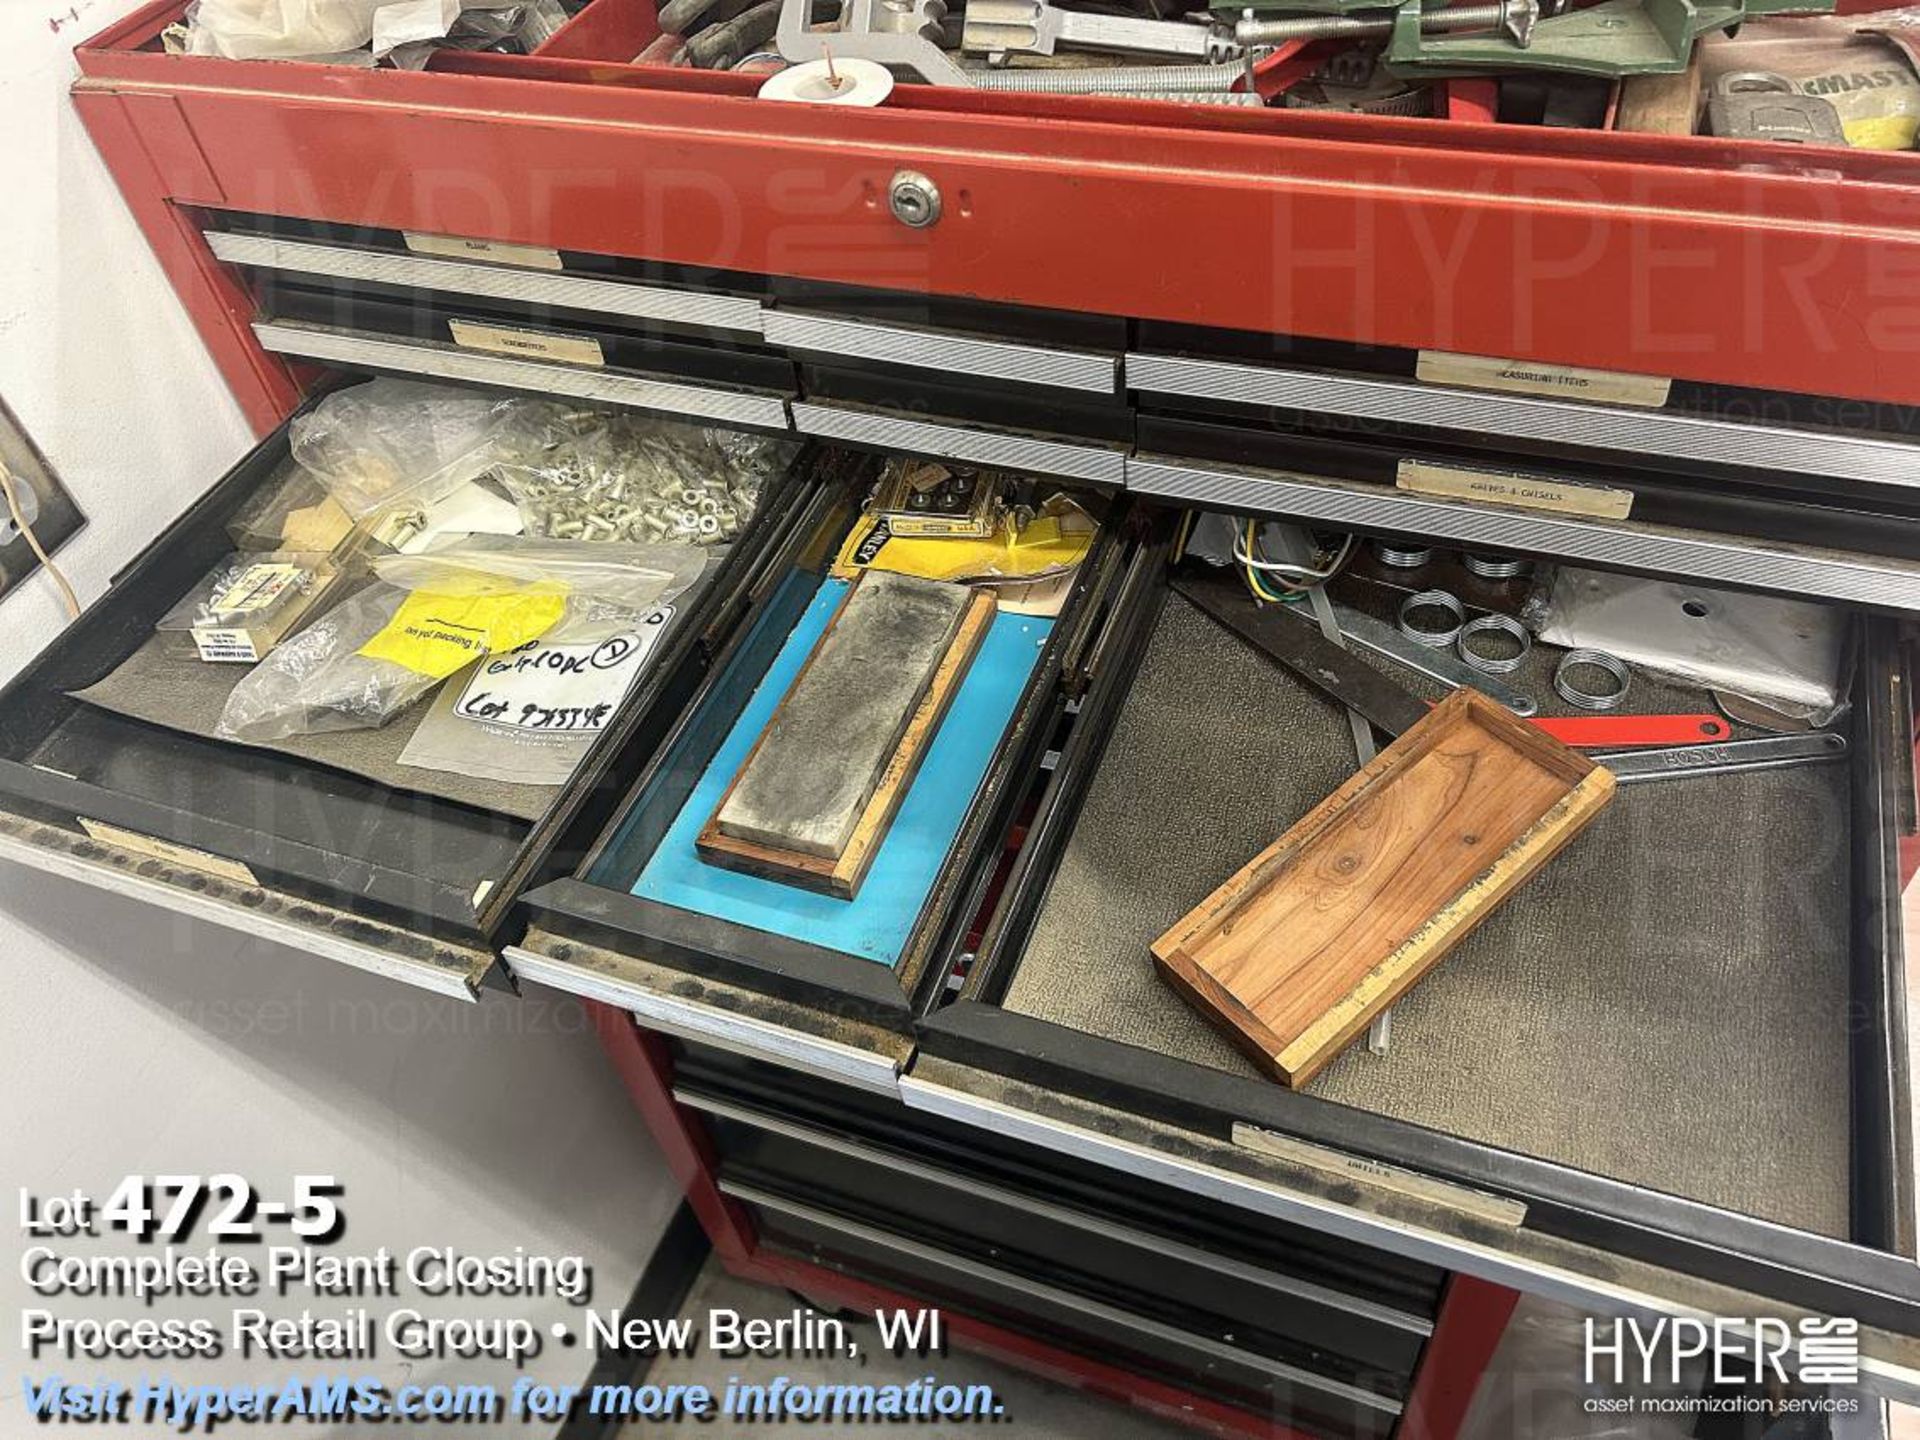 Roll around toolbox, levels, wrenches, stripers, glue guns, Dremel's, hole saw, and rivet guns - Image 5 of 14